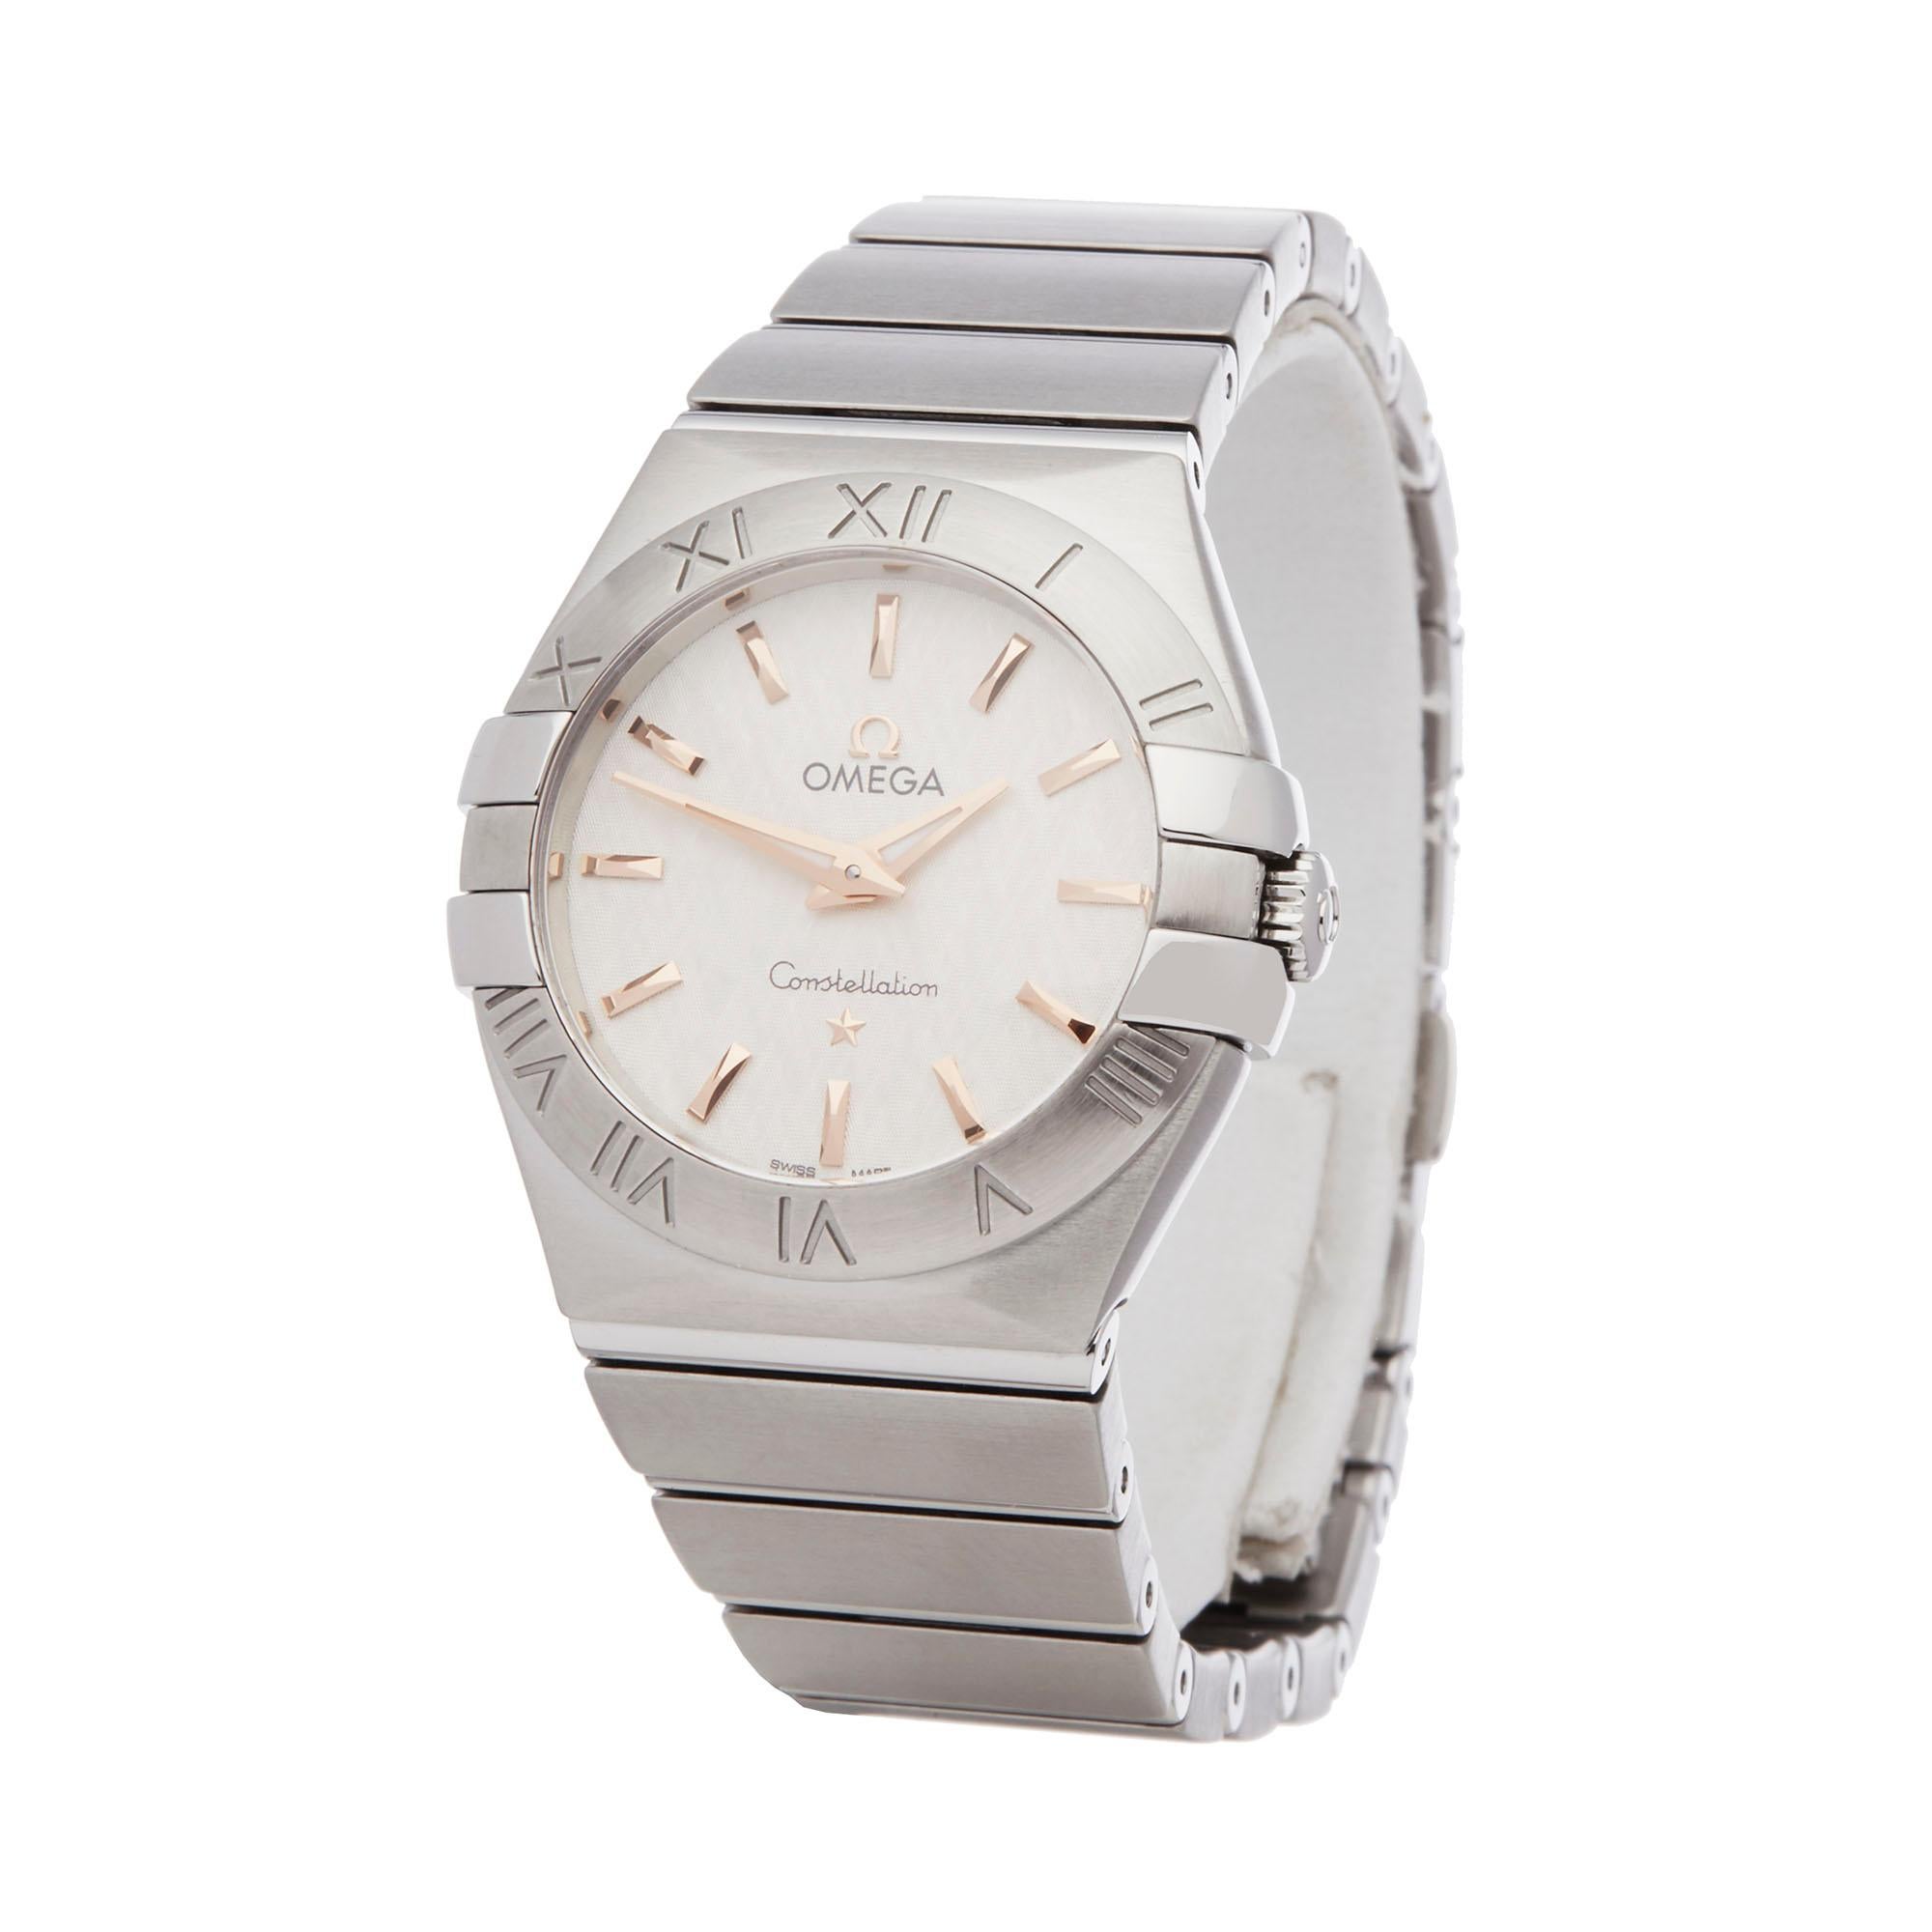 Ref: W6317
Manufacturer: Omega
Model: Constellation
Model Ref: 123.10.27.60.02.004
Age: Circa 2000's
Gender: Ladies
Complete With: Box Only
Dial: White Baton
Glass: Sapphire Crystal
Movement: Quartz
Water Resistance: To Manufacturers